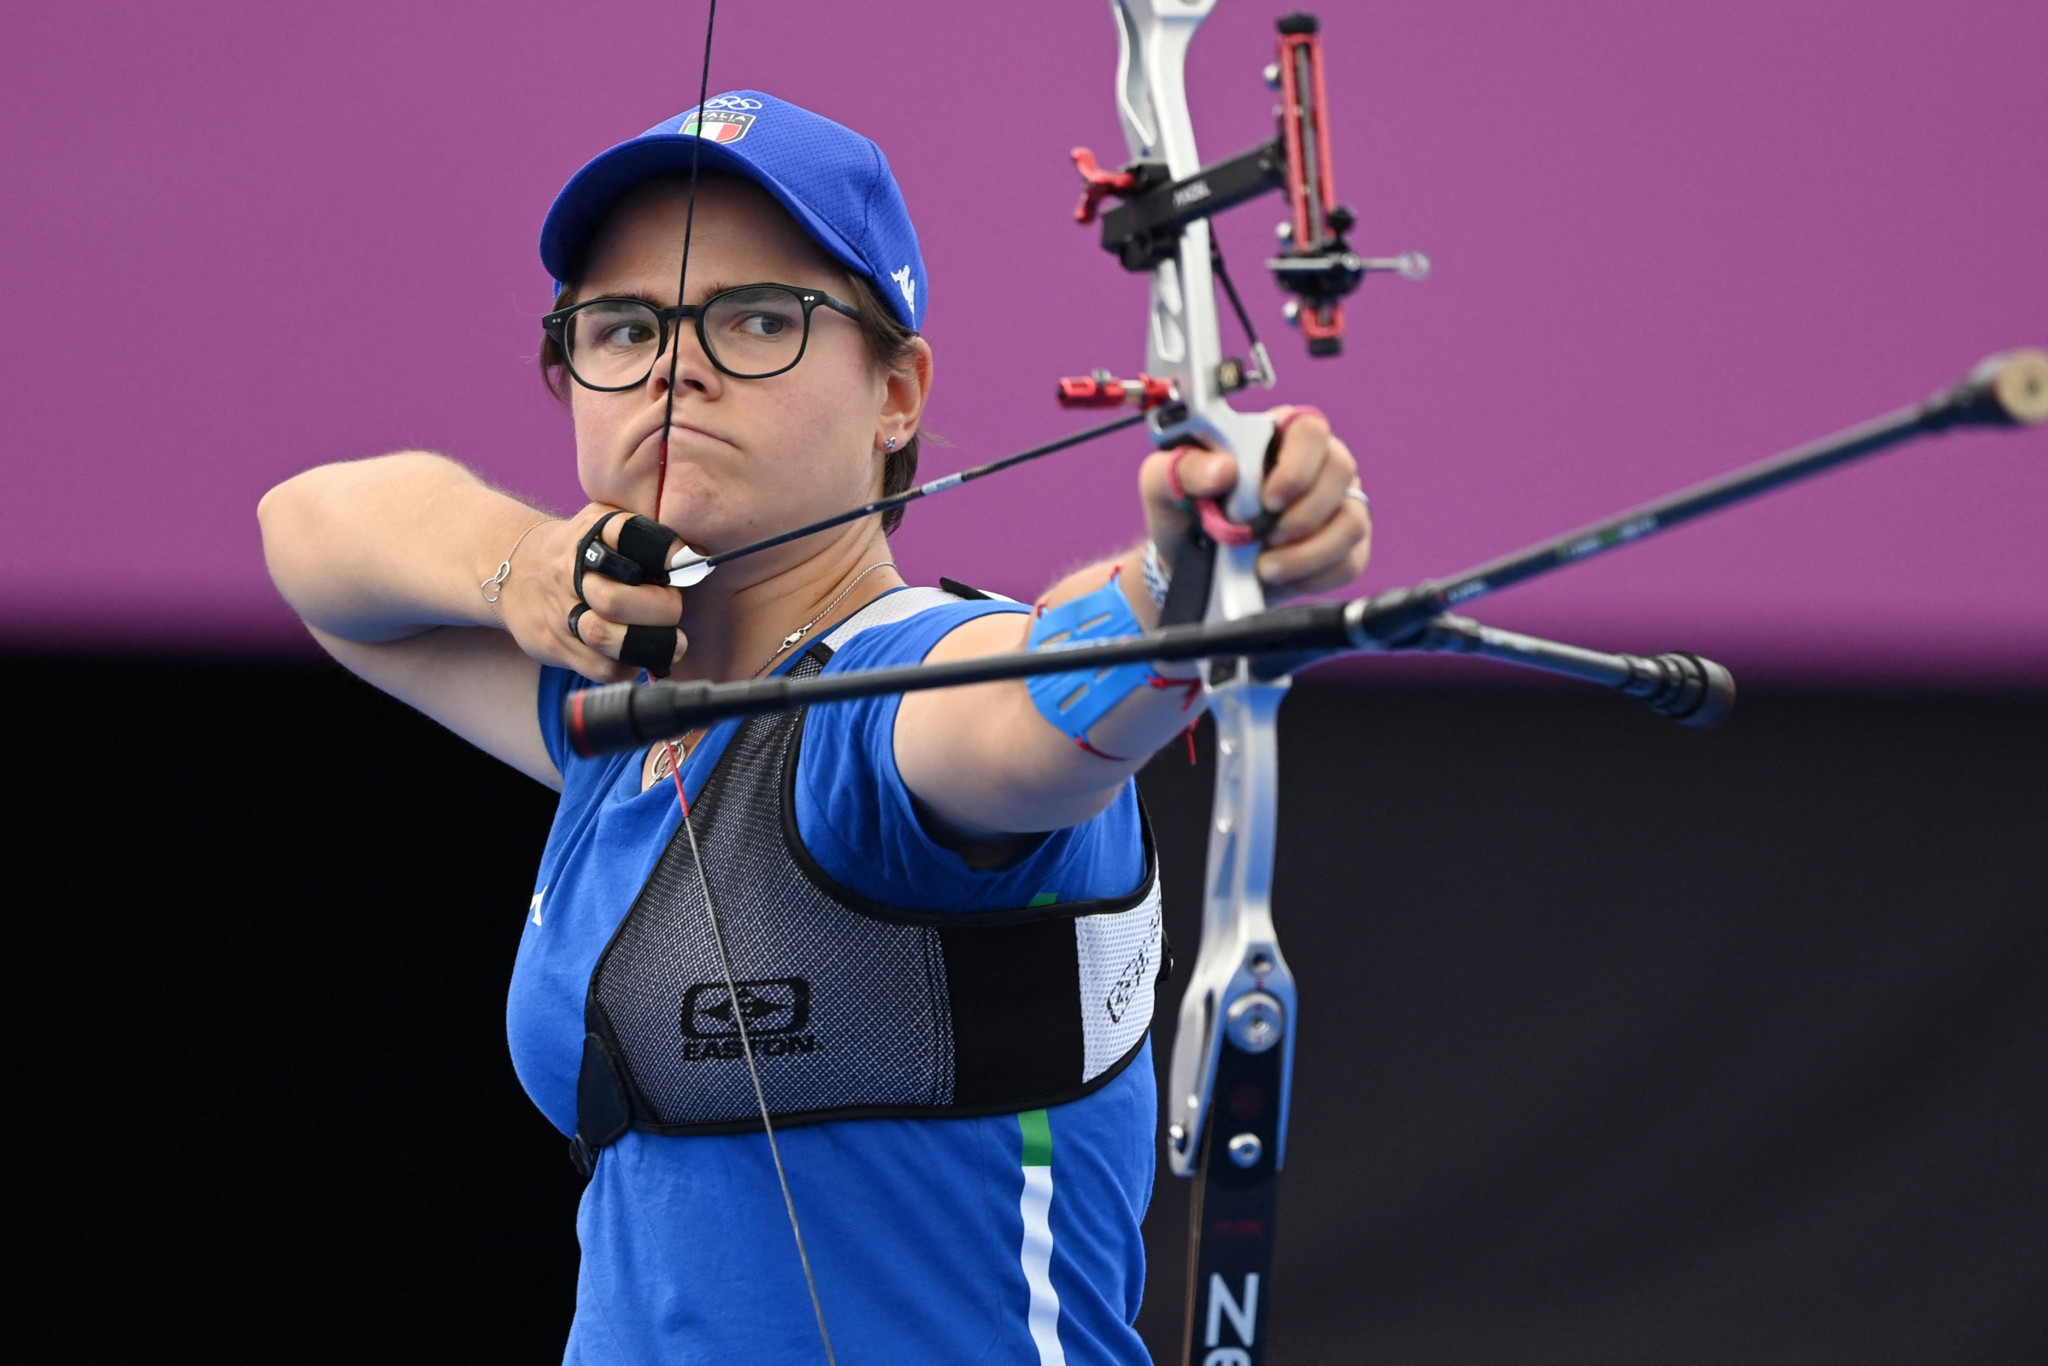 Italy's Olympic bronze medallist Lucilla Boari exited the women's recurve competition at the European Indoor Archery Championships ©Getty Images